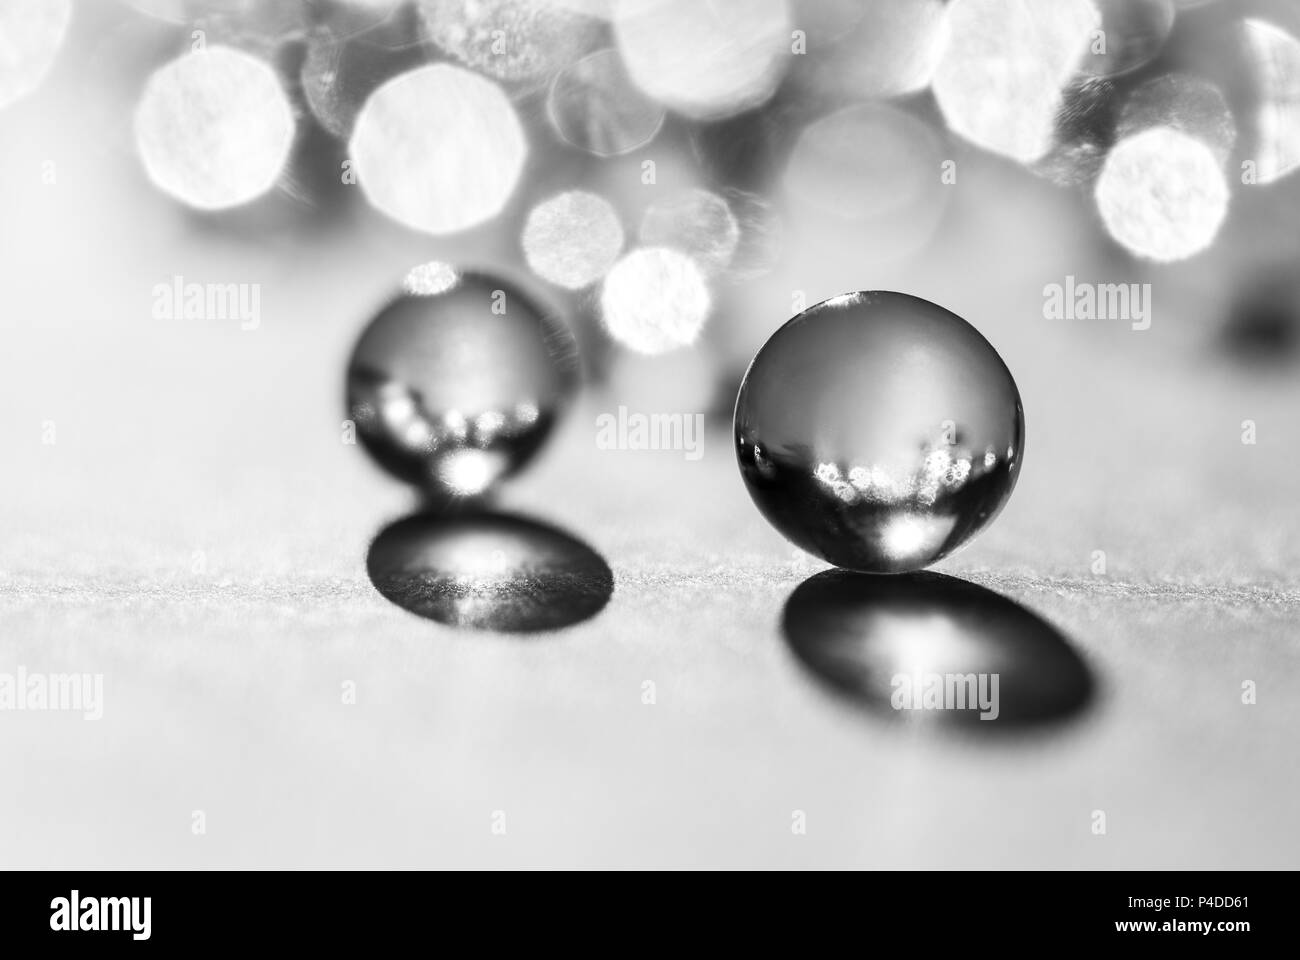 Little glass balls in direct sunlight, macro. Abstract background, black and white photo Stock Photo